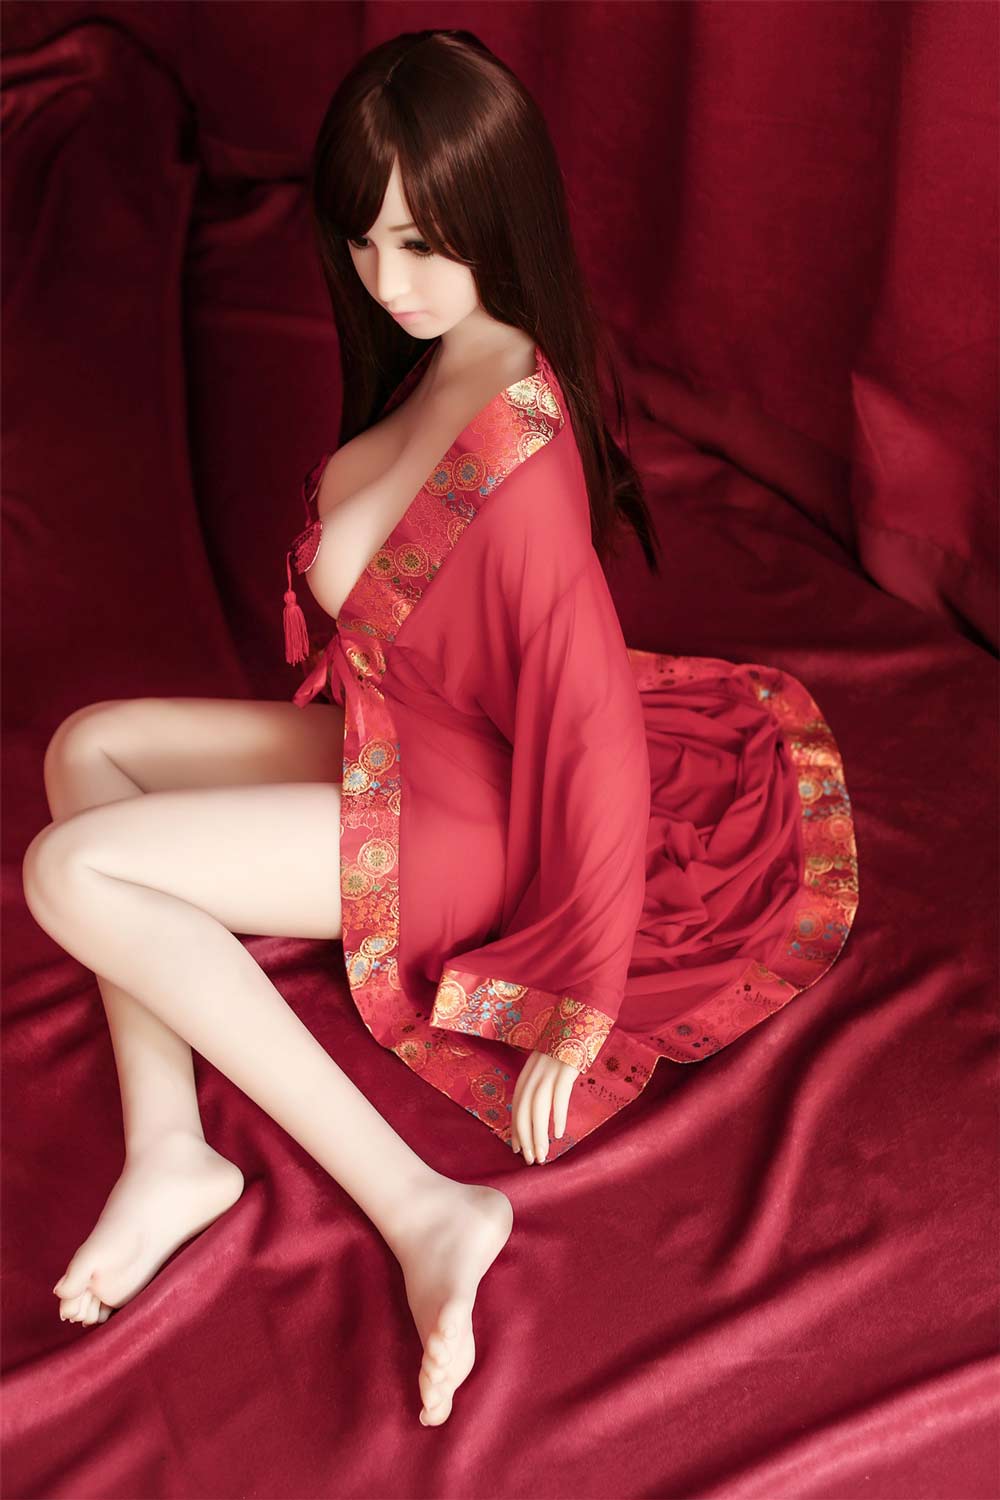 Sex doll in red robe